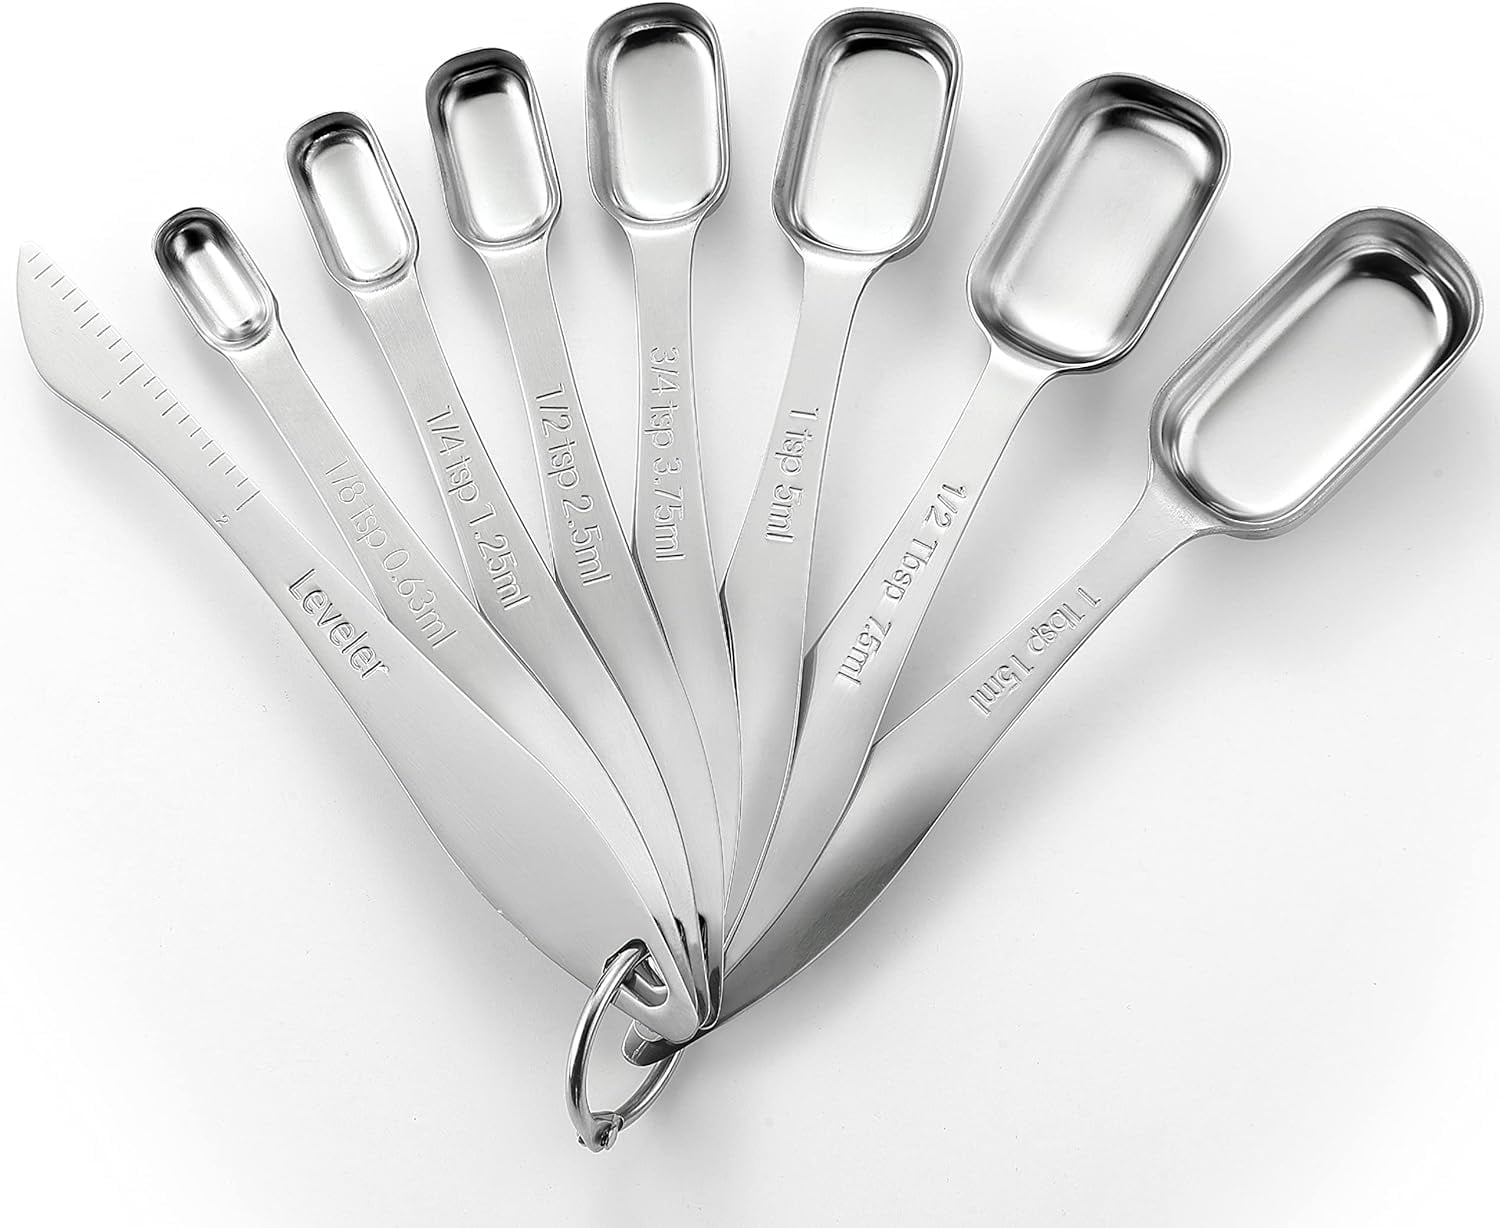  Zulay Heavy Duty Stainless Steel Measuring Spoons with Easy to  Read, Slim Design for Narrow Spice Jars, 6 Piece Measuring Spoons with  Etched Markings & Removable Clasp, Table Spoons Measuring Spoon